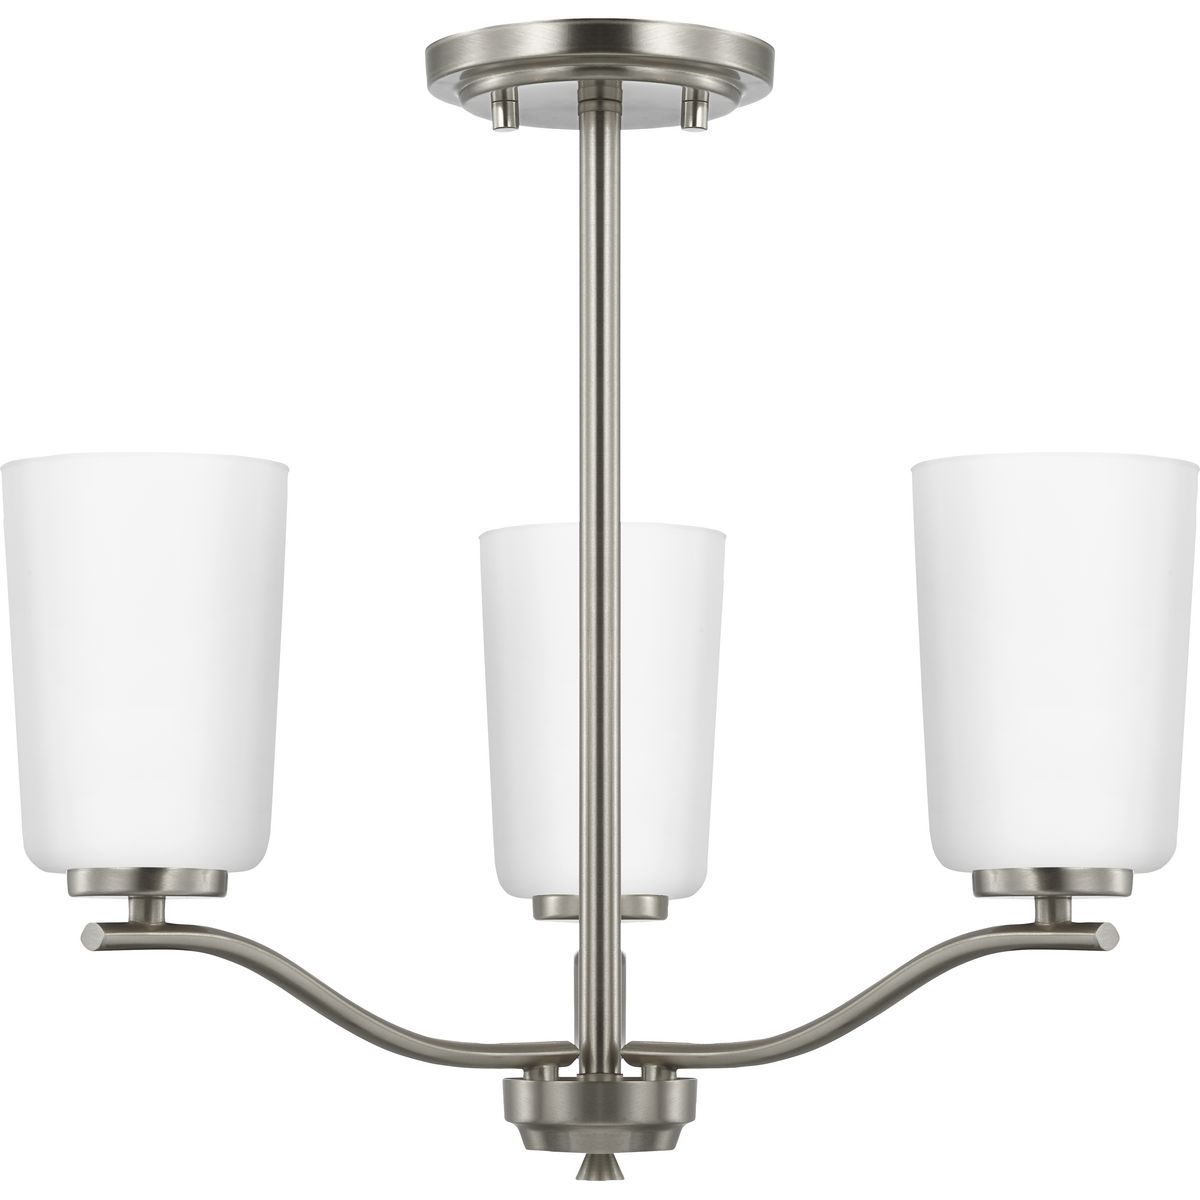 Adley Collection Three-Light Brushed Nickel Etched White Opal Glass New Traditional Semi-Flush Convertible Light - Dry Location Listed